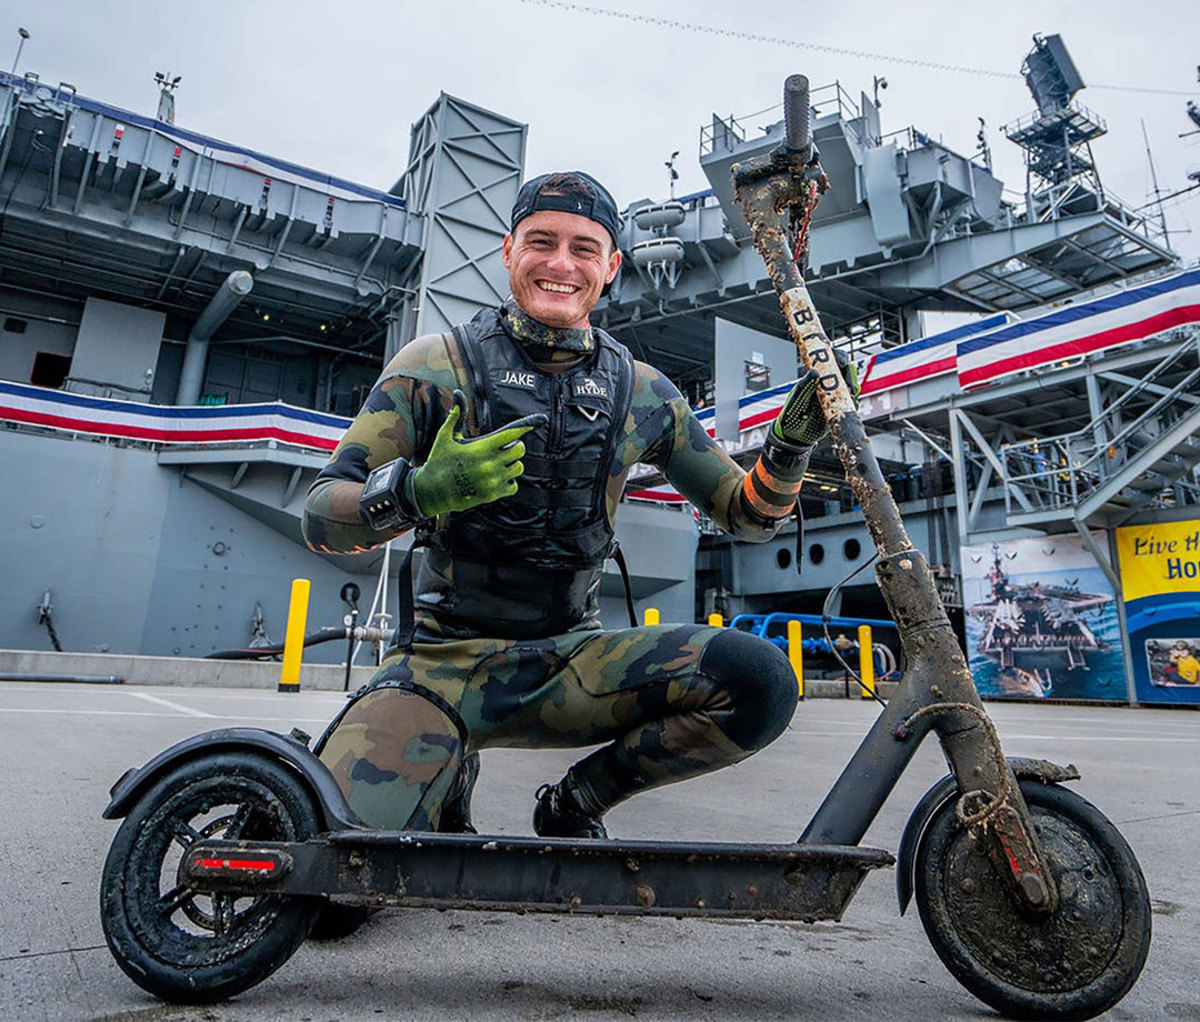 Koehler with a scooter he found while diving with the Navy.